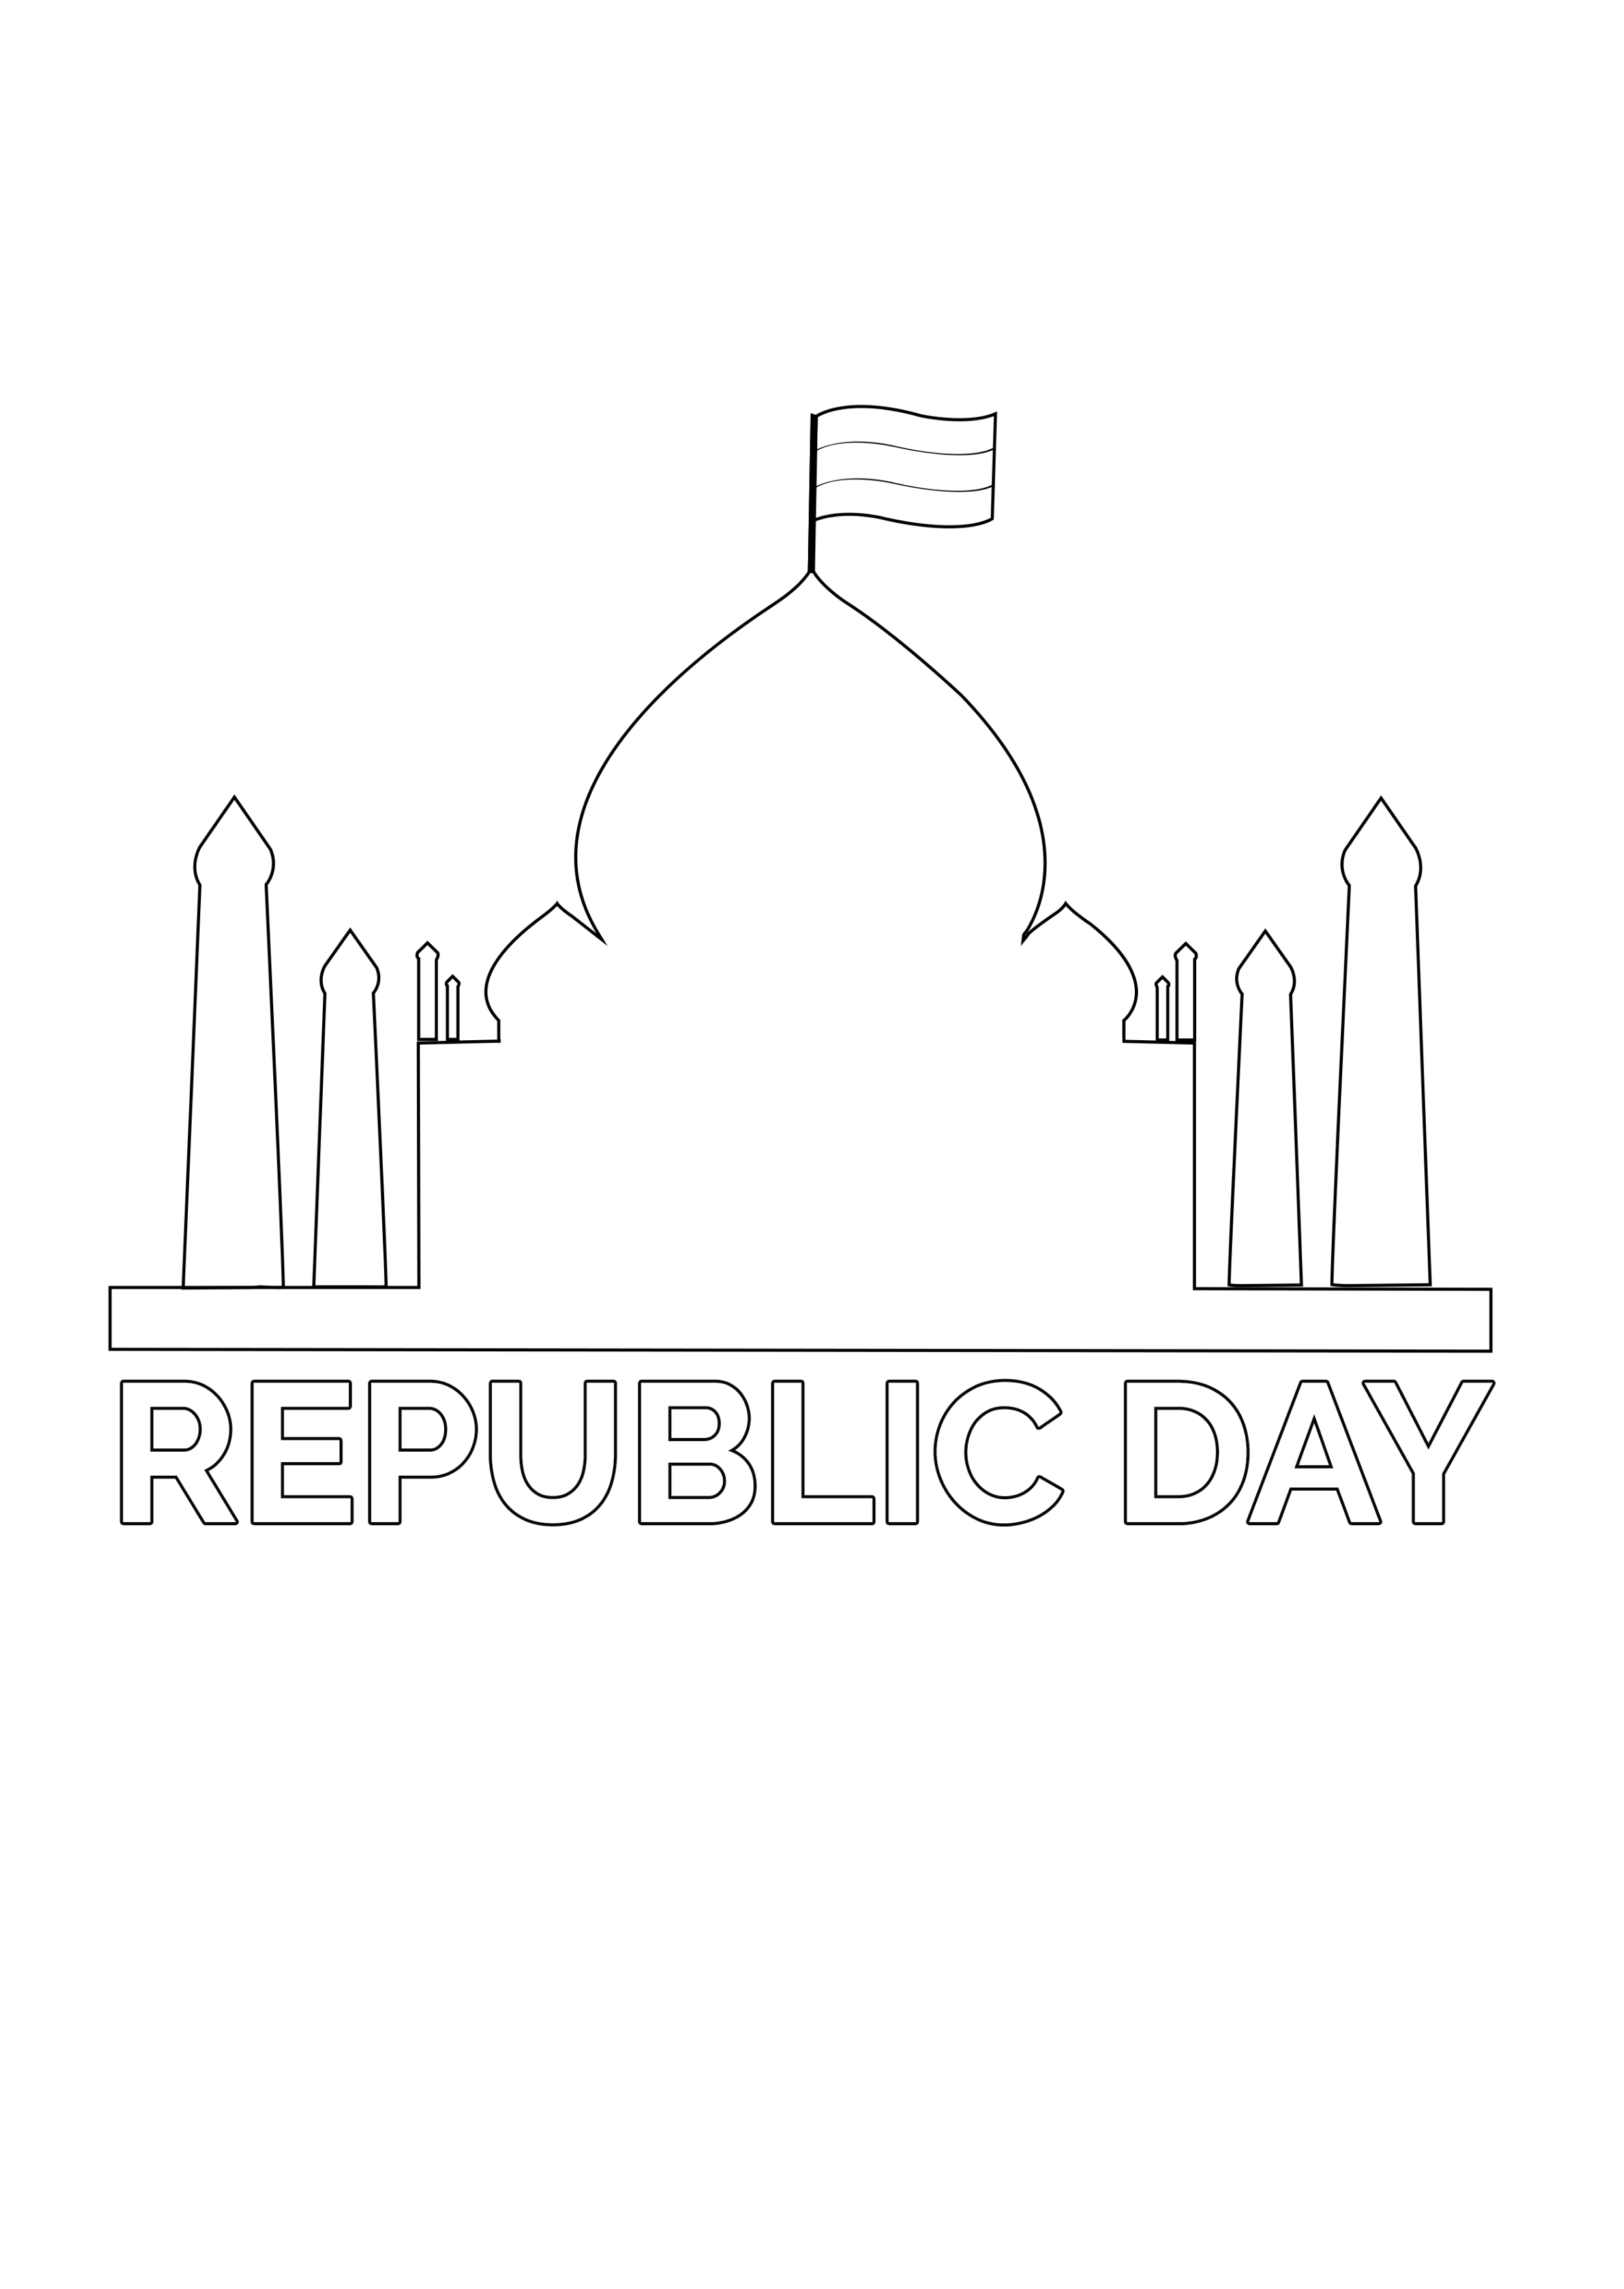 Huebach Happy Republic Day | Republic day, Independence day images, Social  media infographic